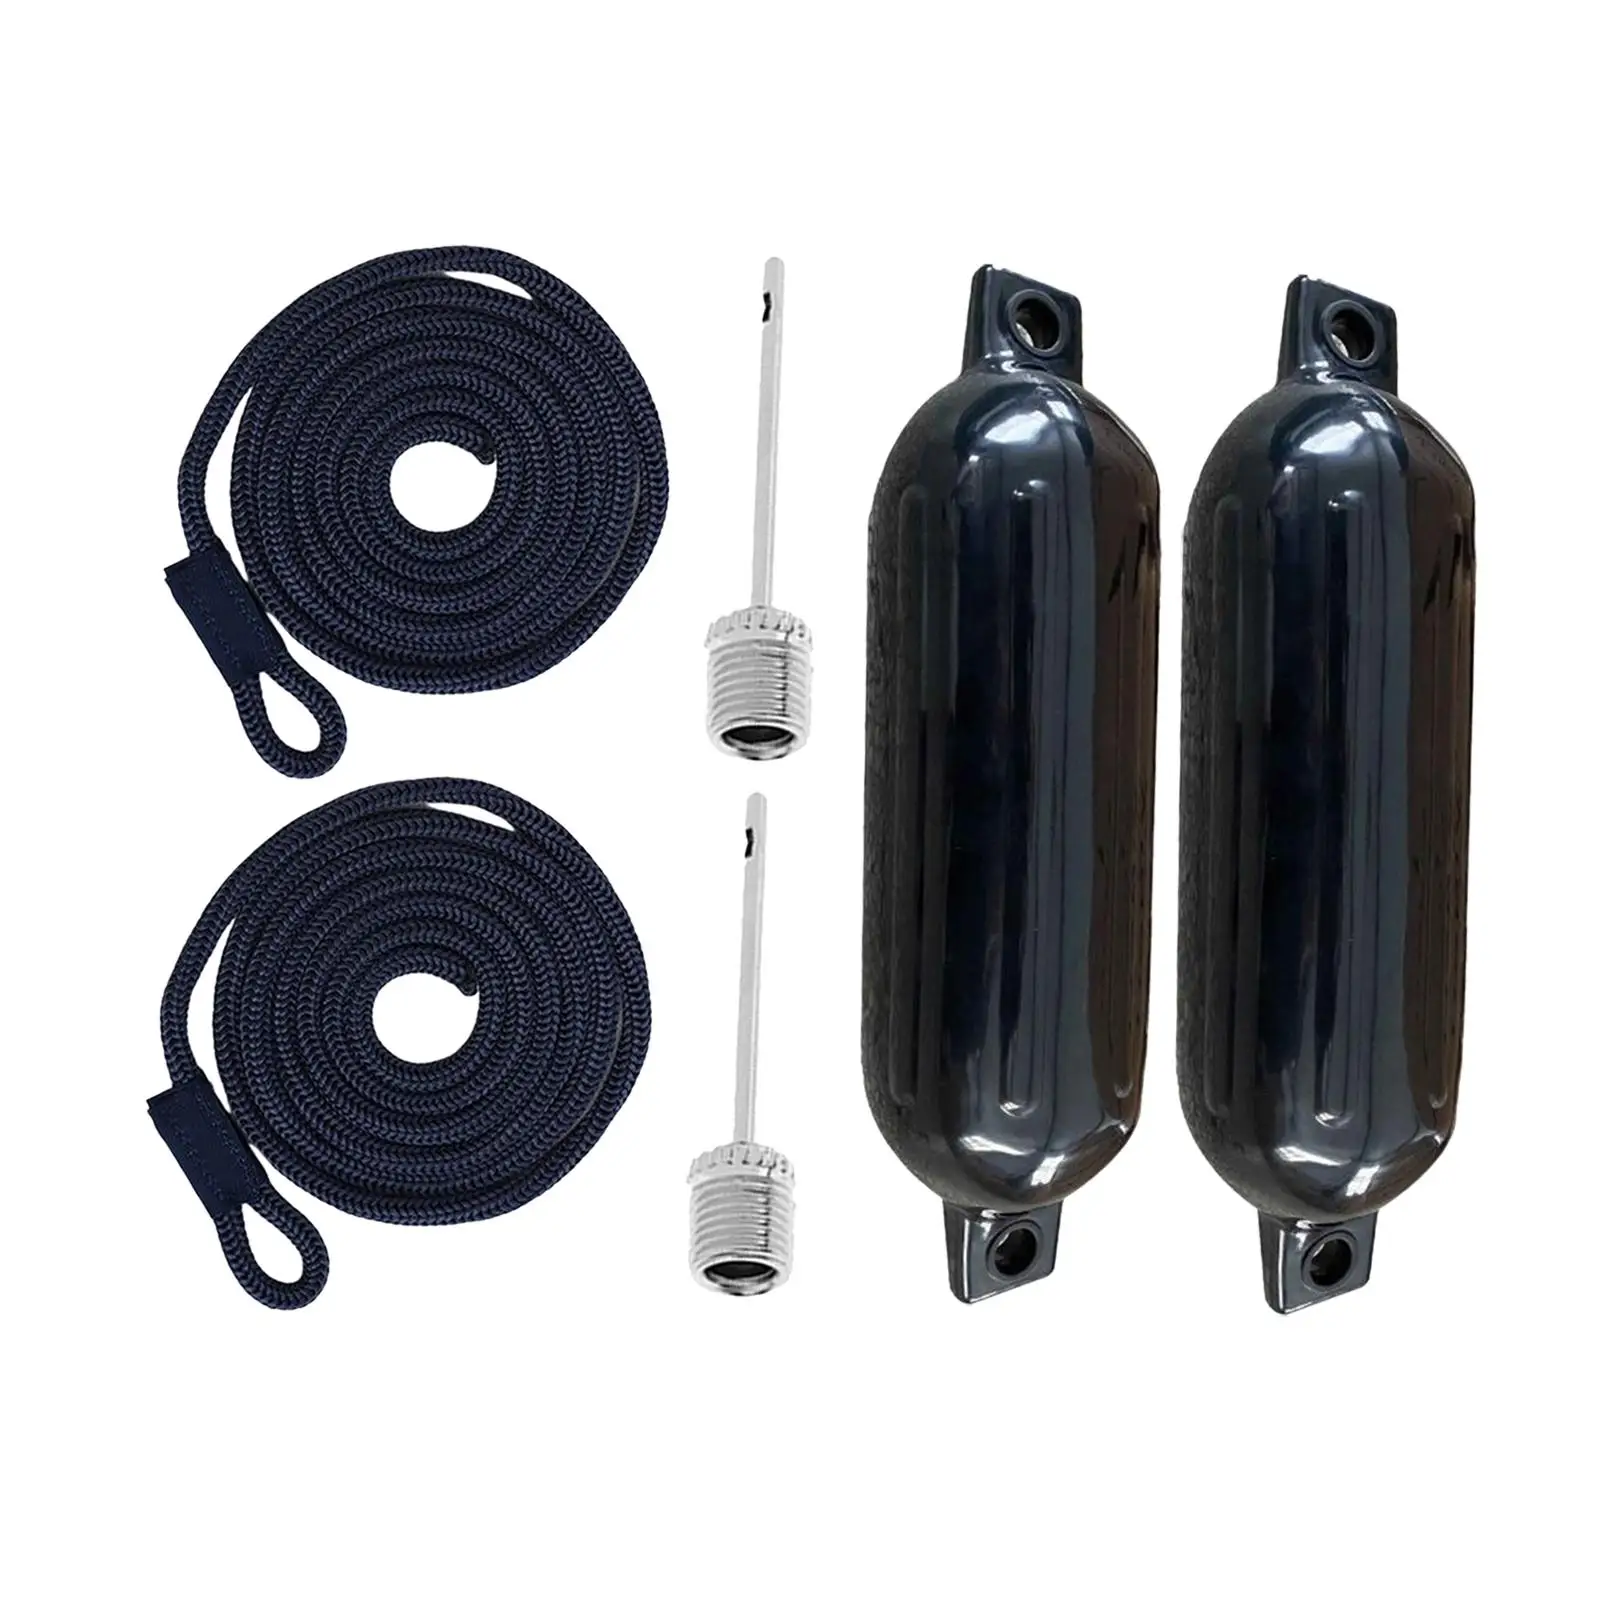 Marine Boat Fenders Boat Accessories with 2 Ropes Anti Collision Protector for Fishing Boats Docking Sailboats Pontoon